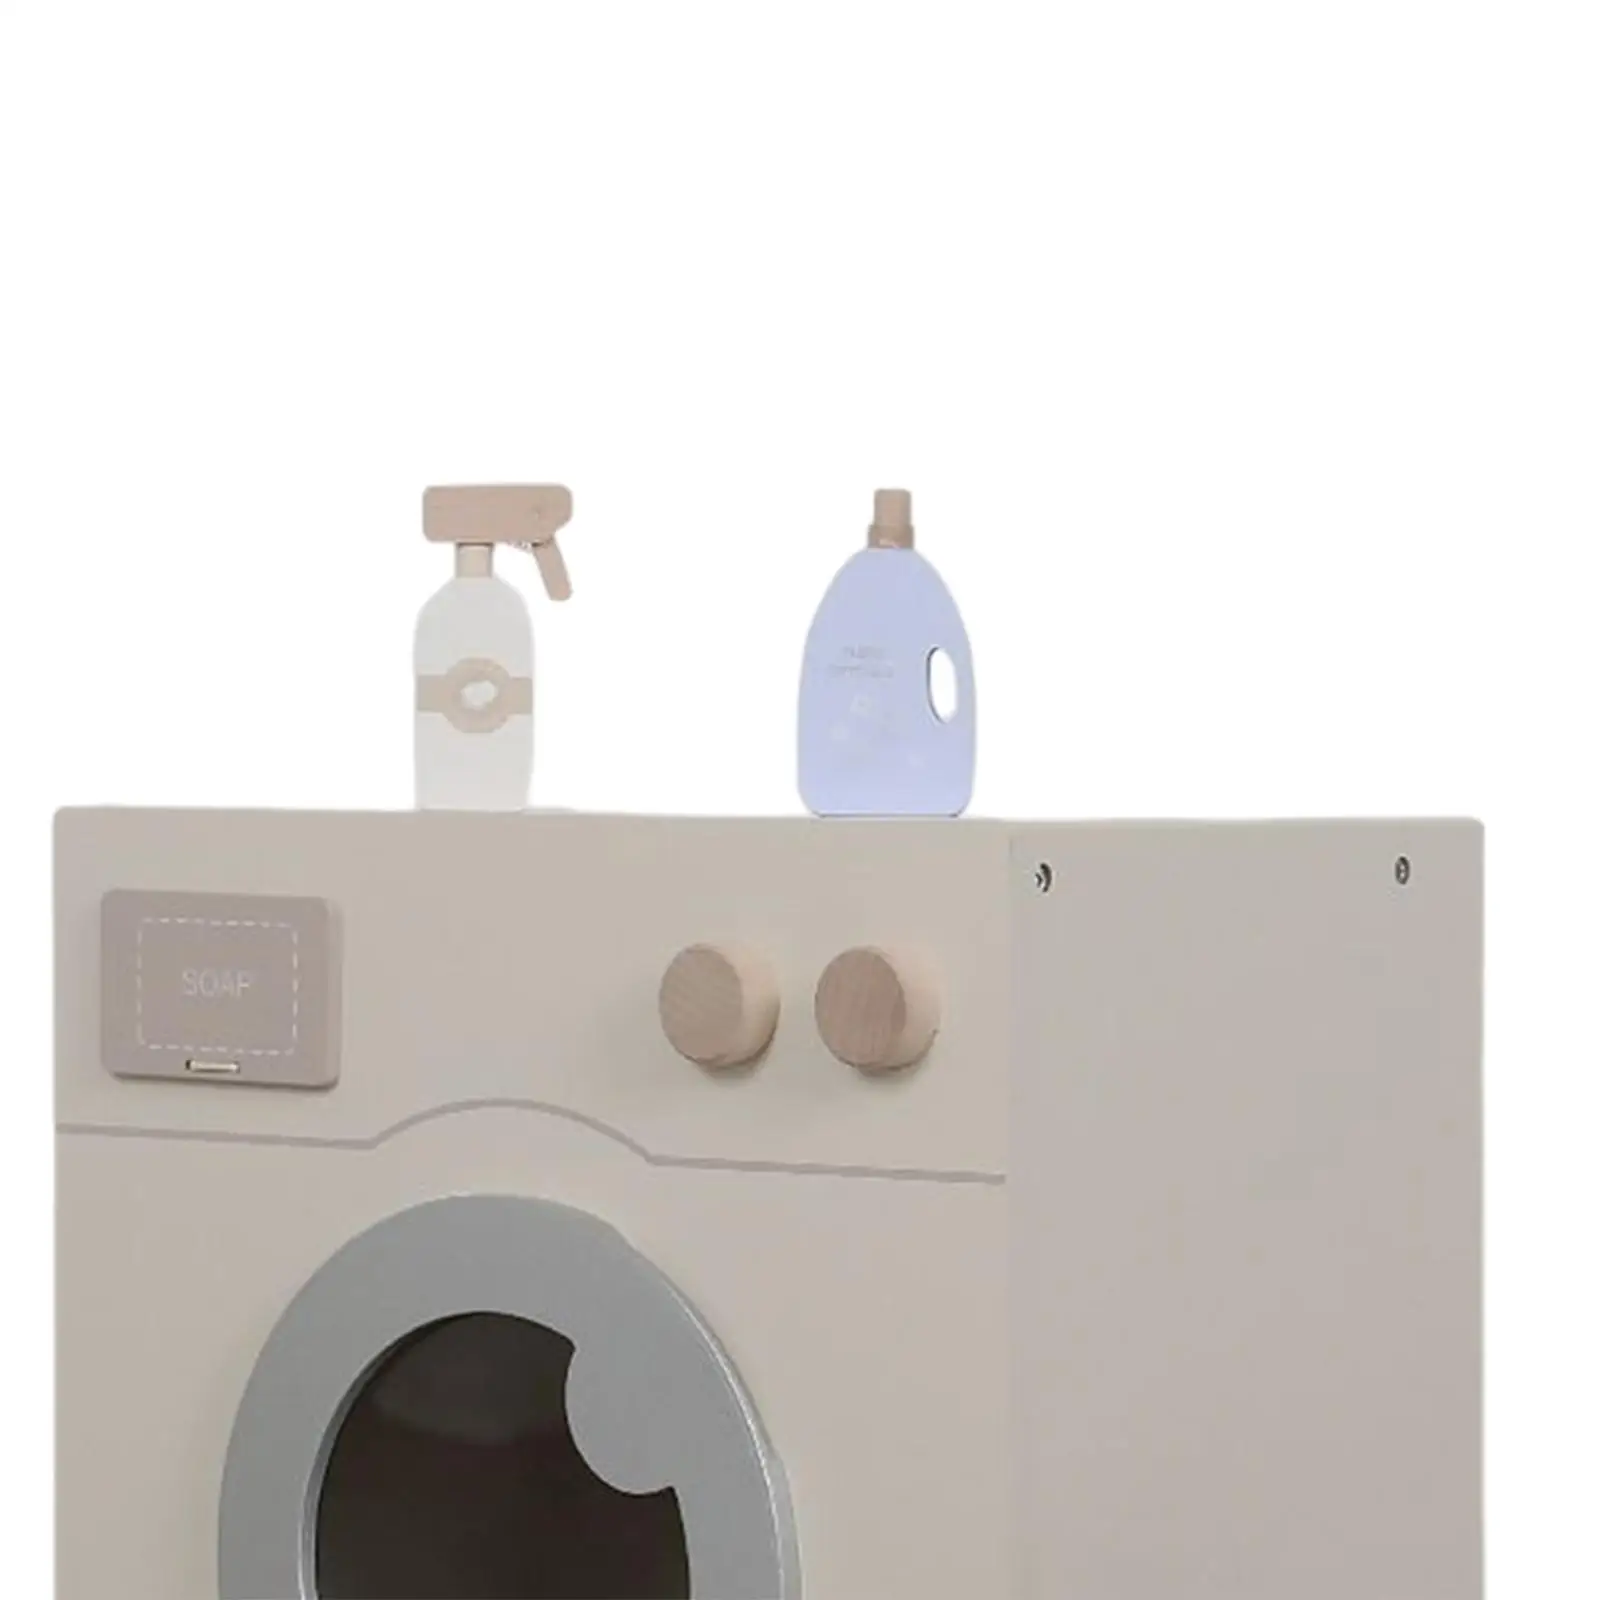 Wooden Washing Machine Playset Appliance Pretend Play Interactive Toy with